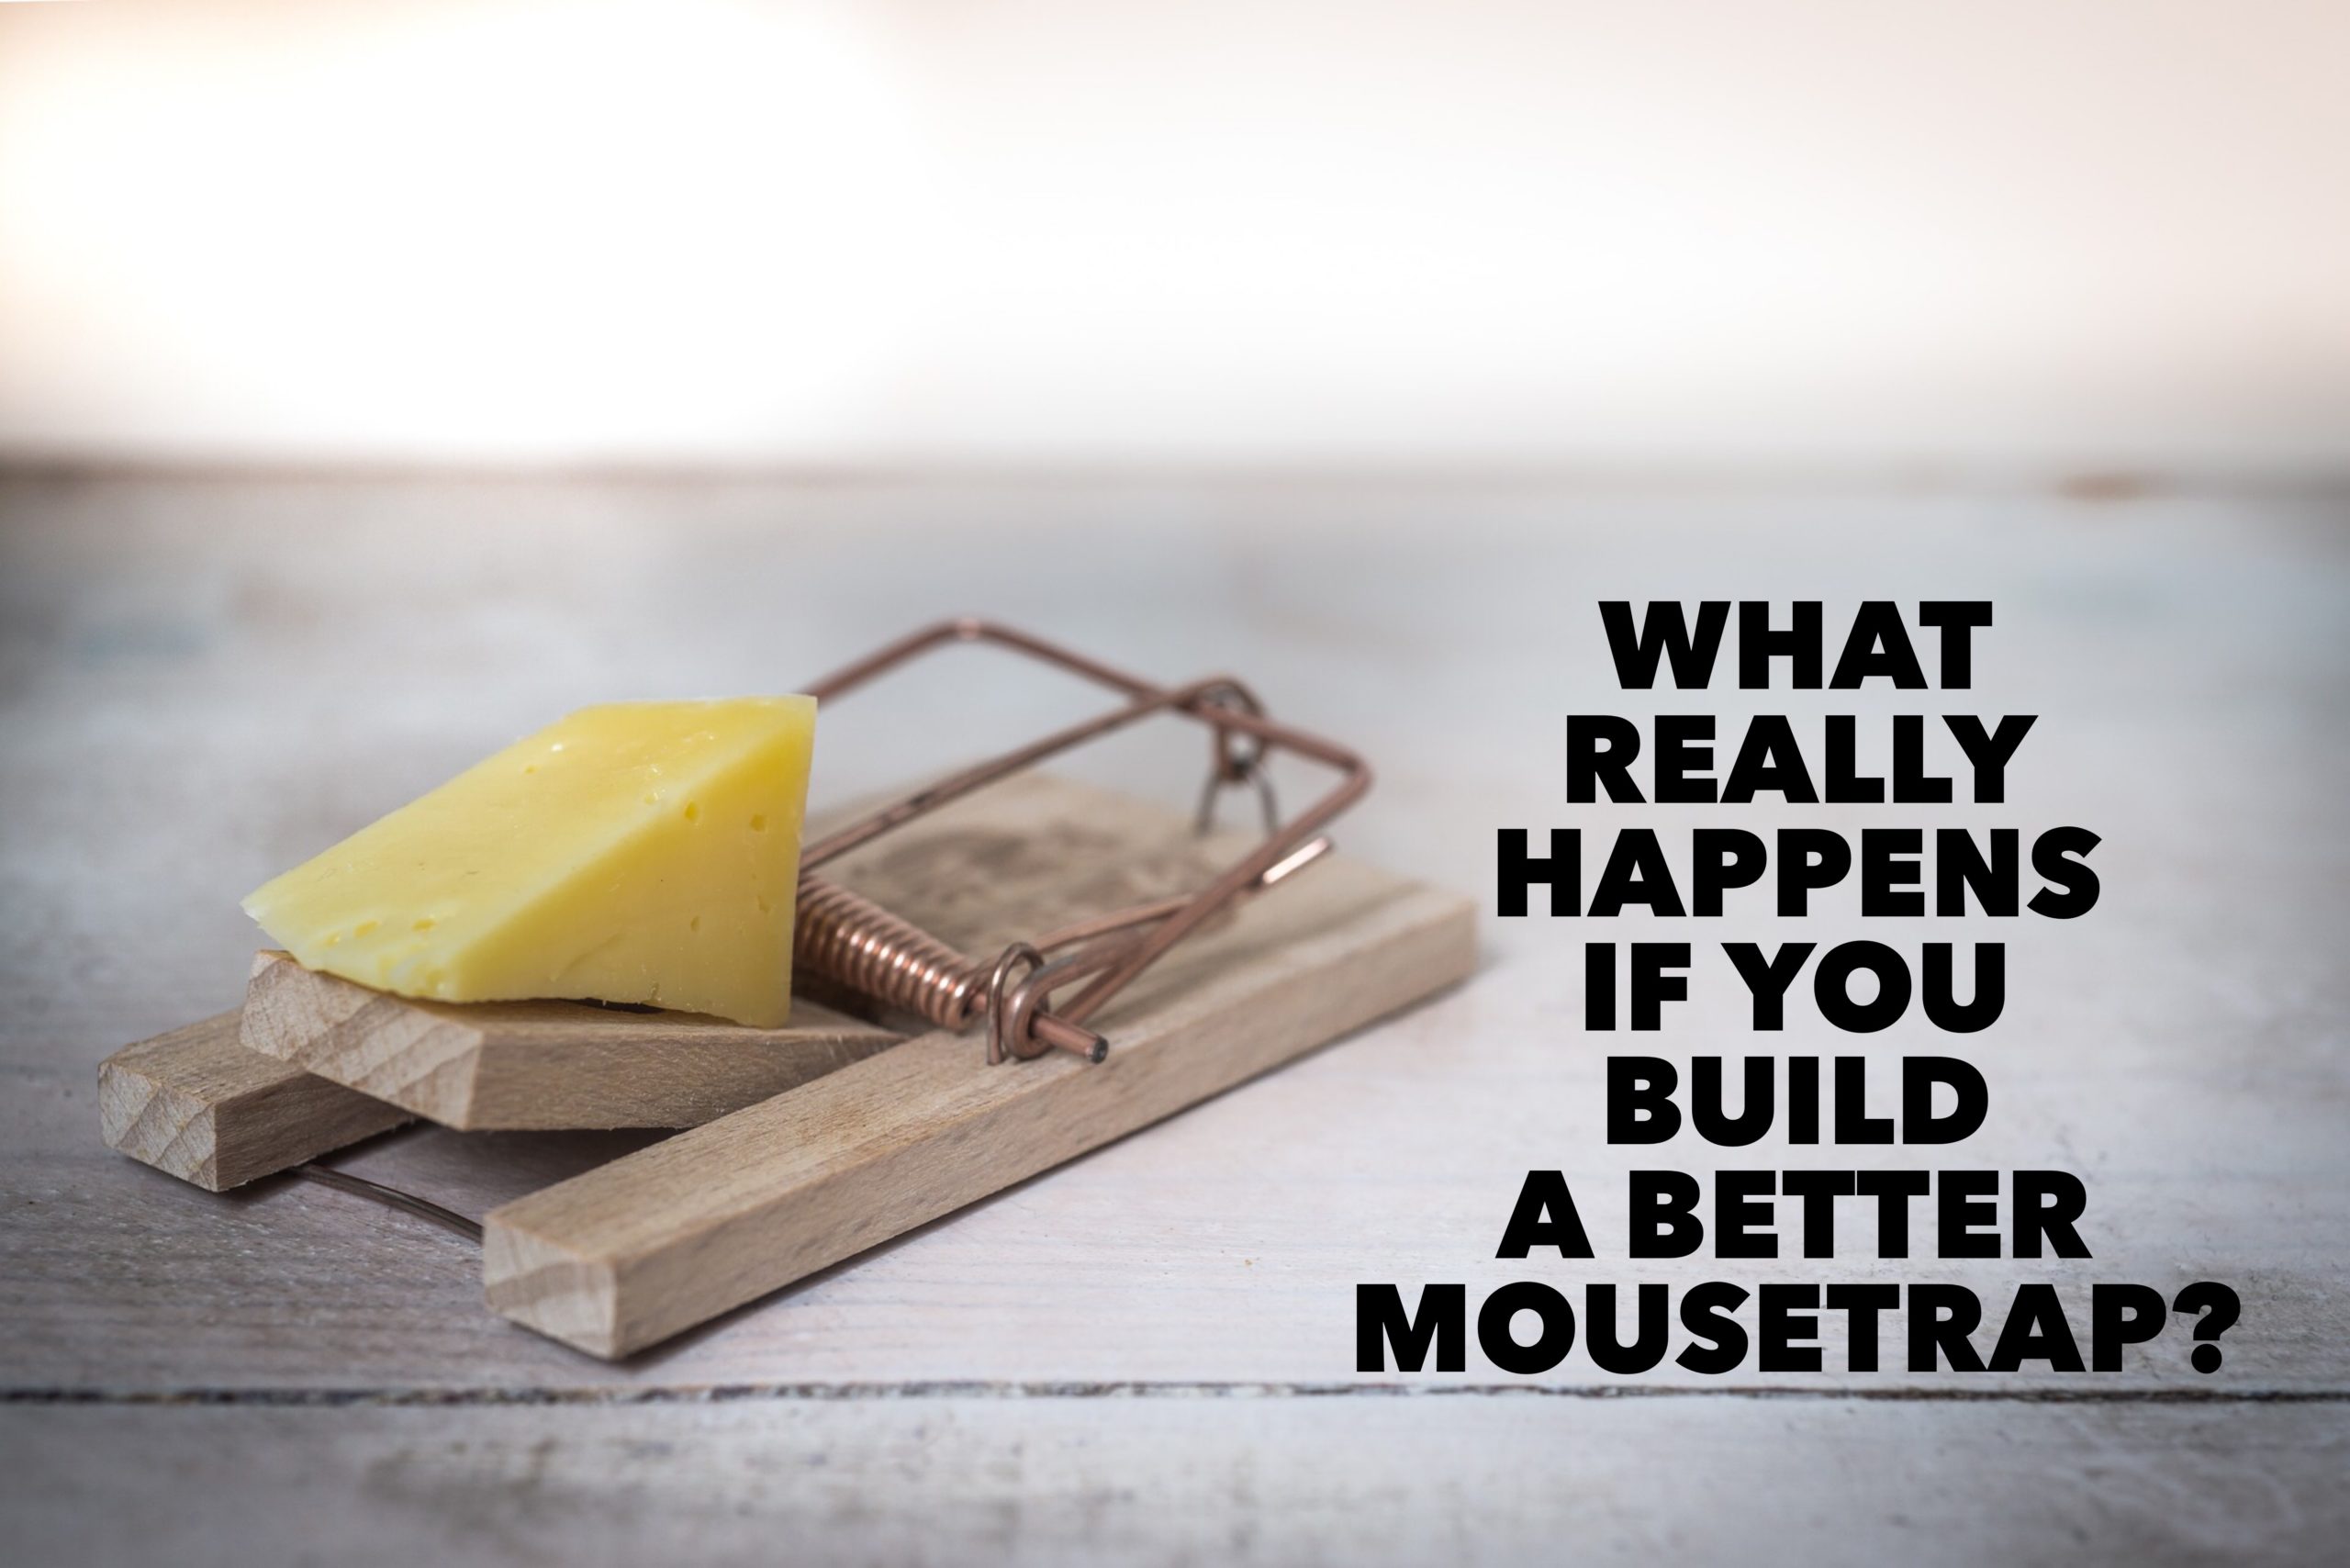 What Really Happens if You Build a Better Mousetrap?